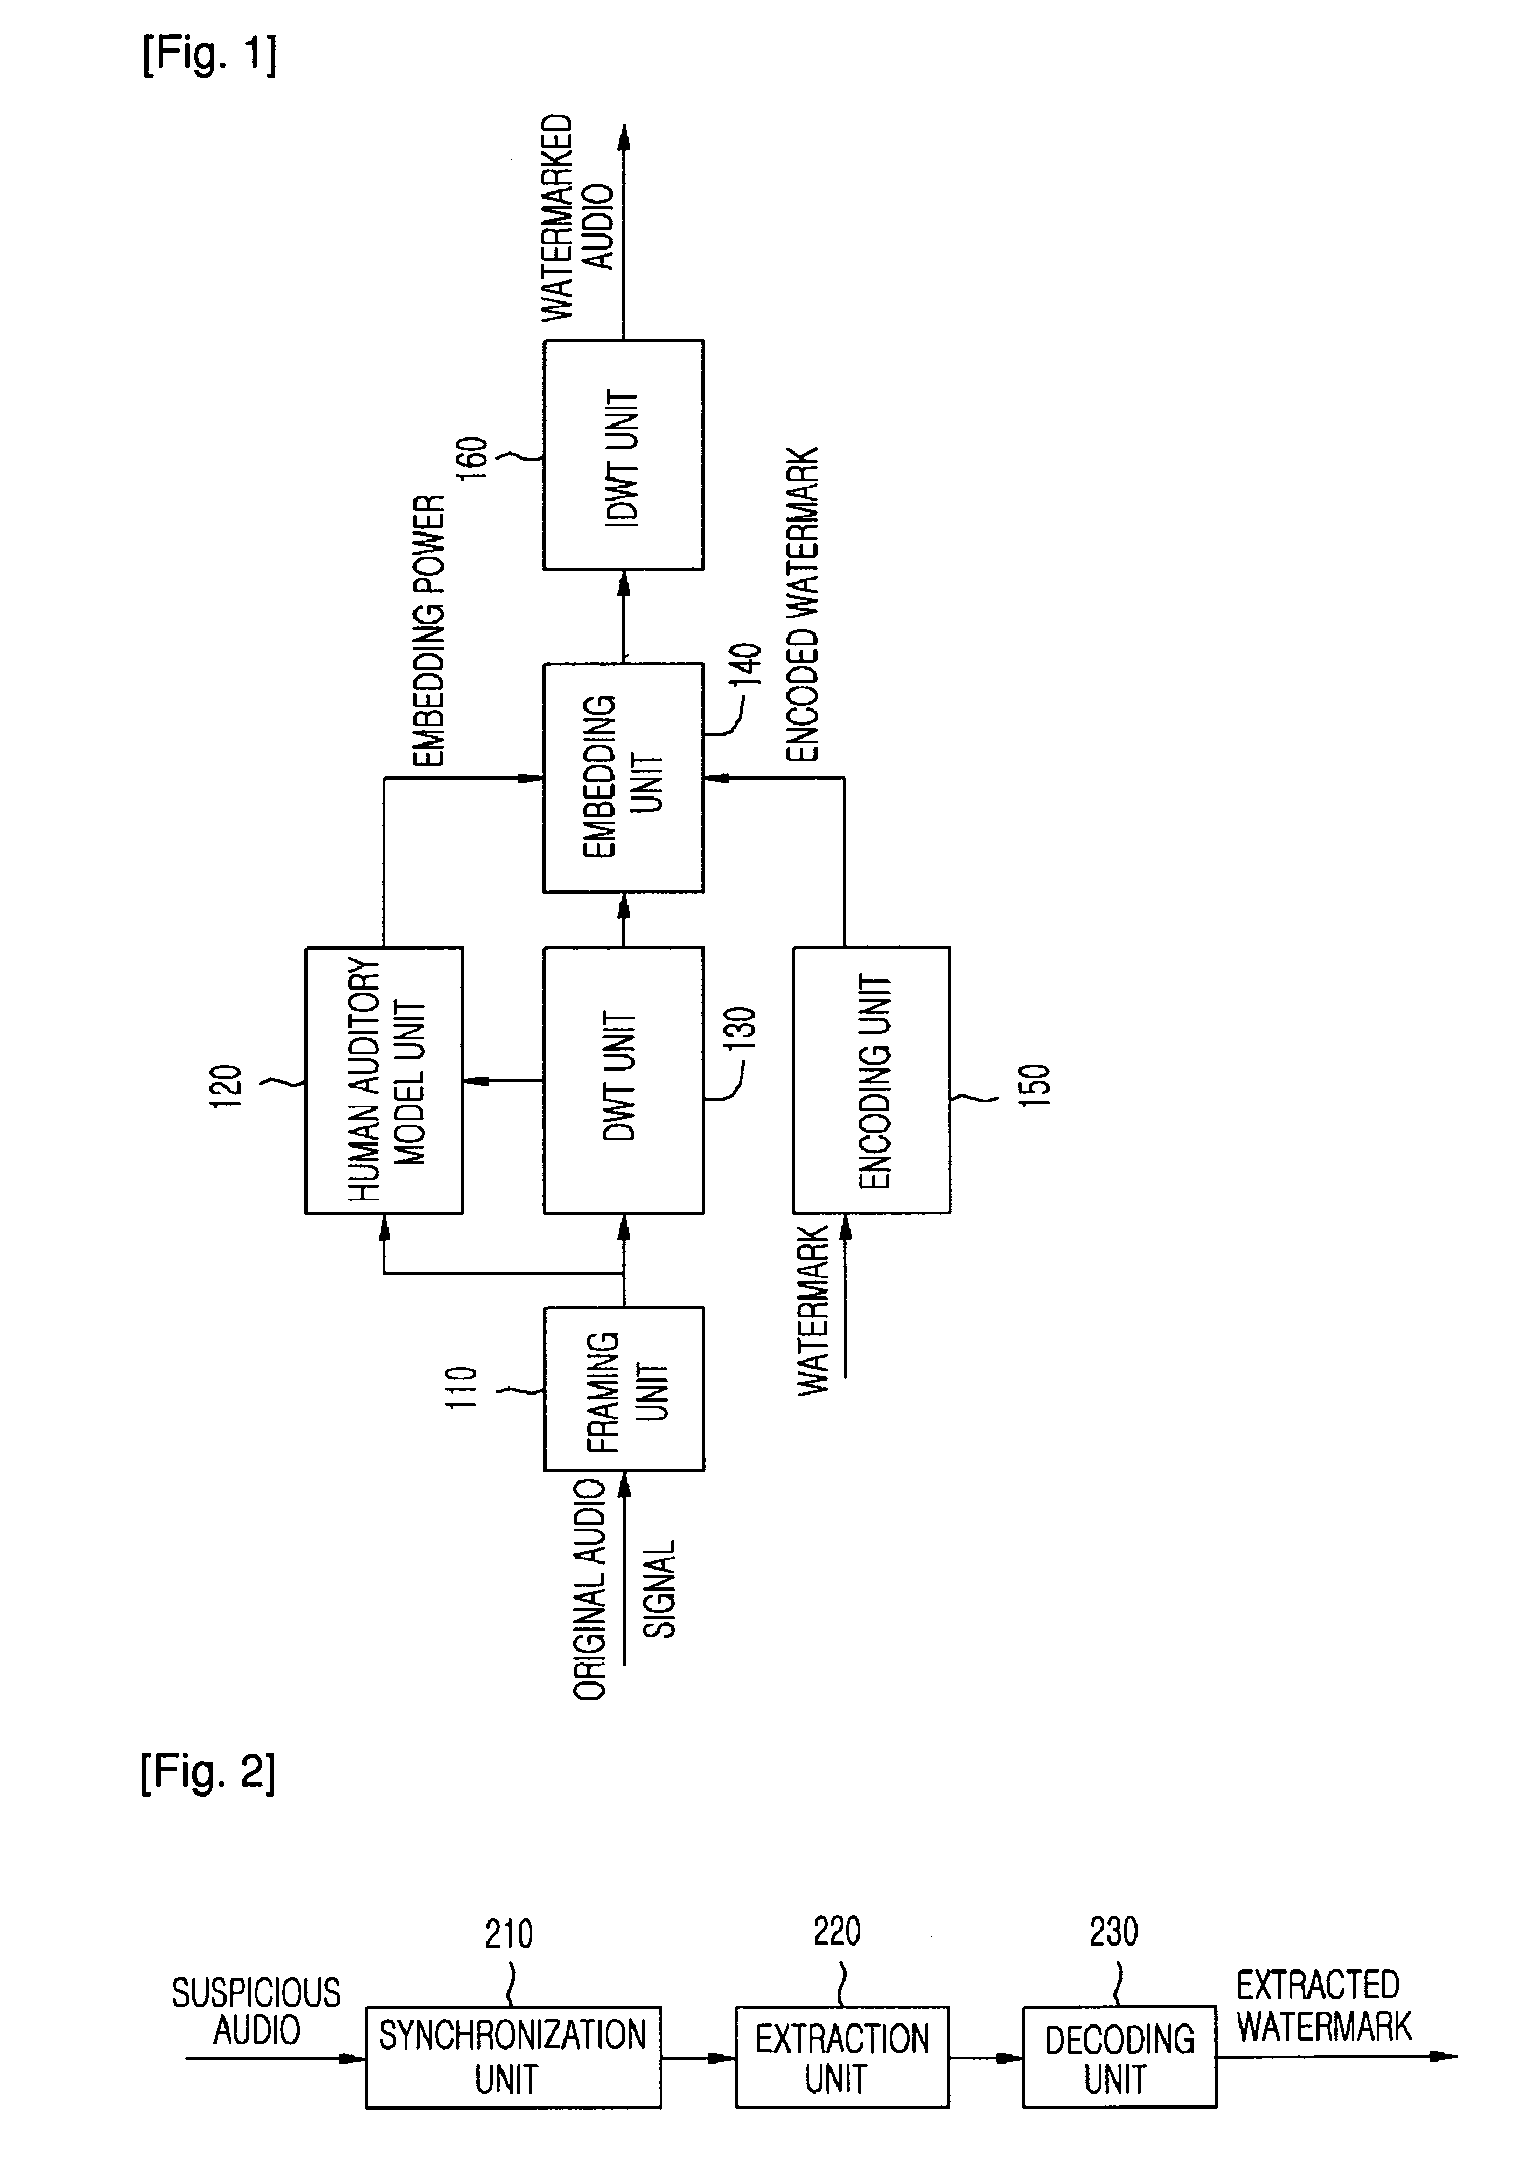 Apparatus and method for inserting/extracting capturing resistant audio watermark based on discrete wavelet transform, audio rights protection system using the same